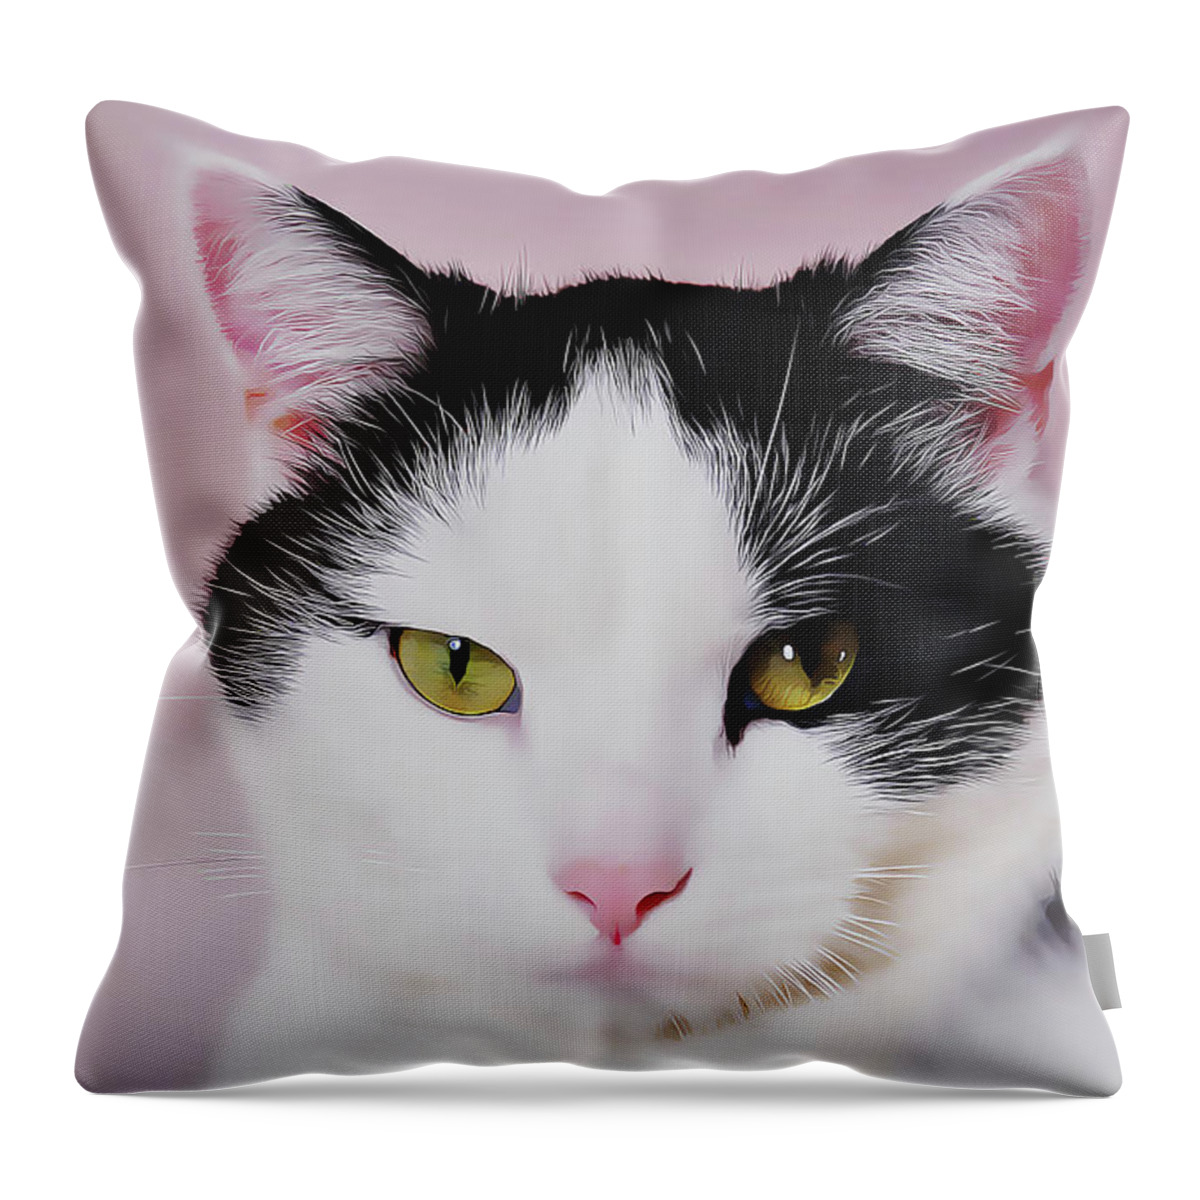 Cloe Throw Pillow featuring the painting Cloe by Harry Warrick